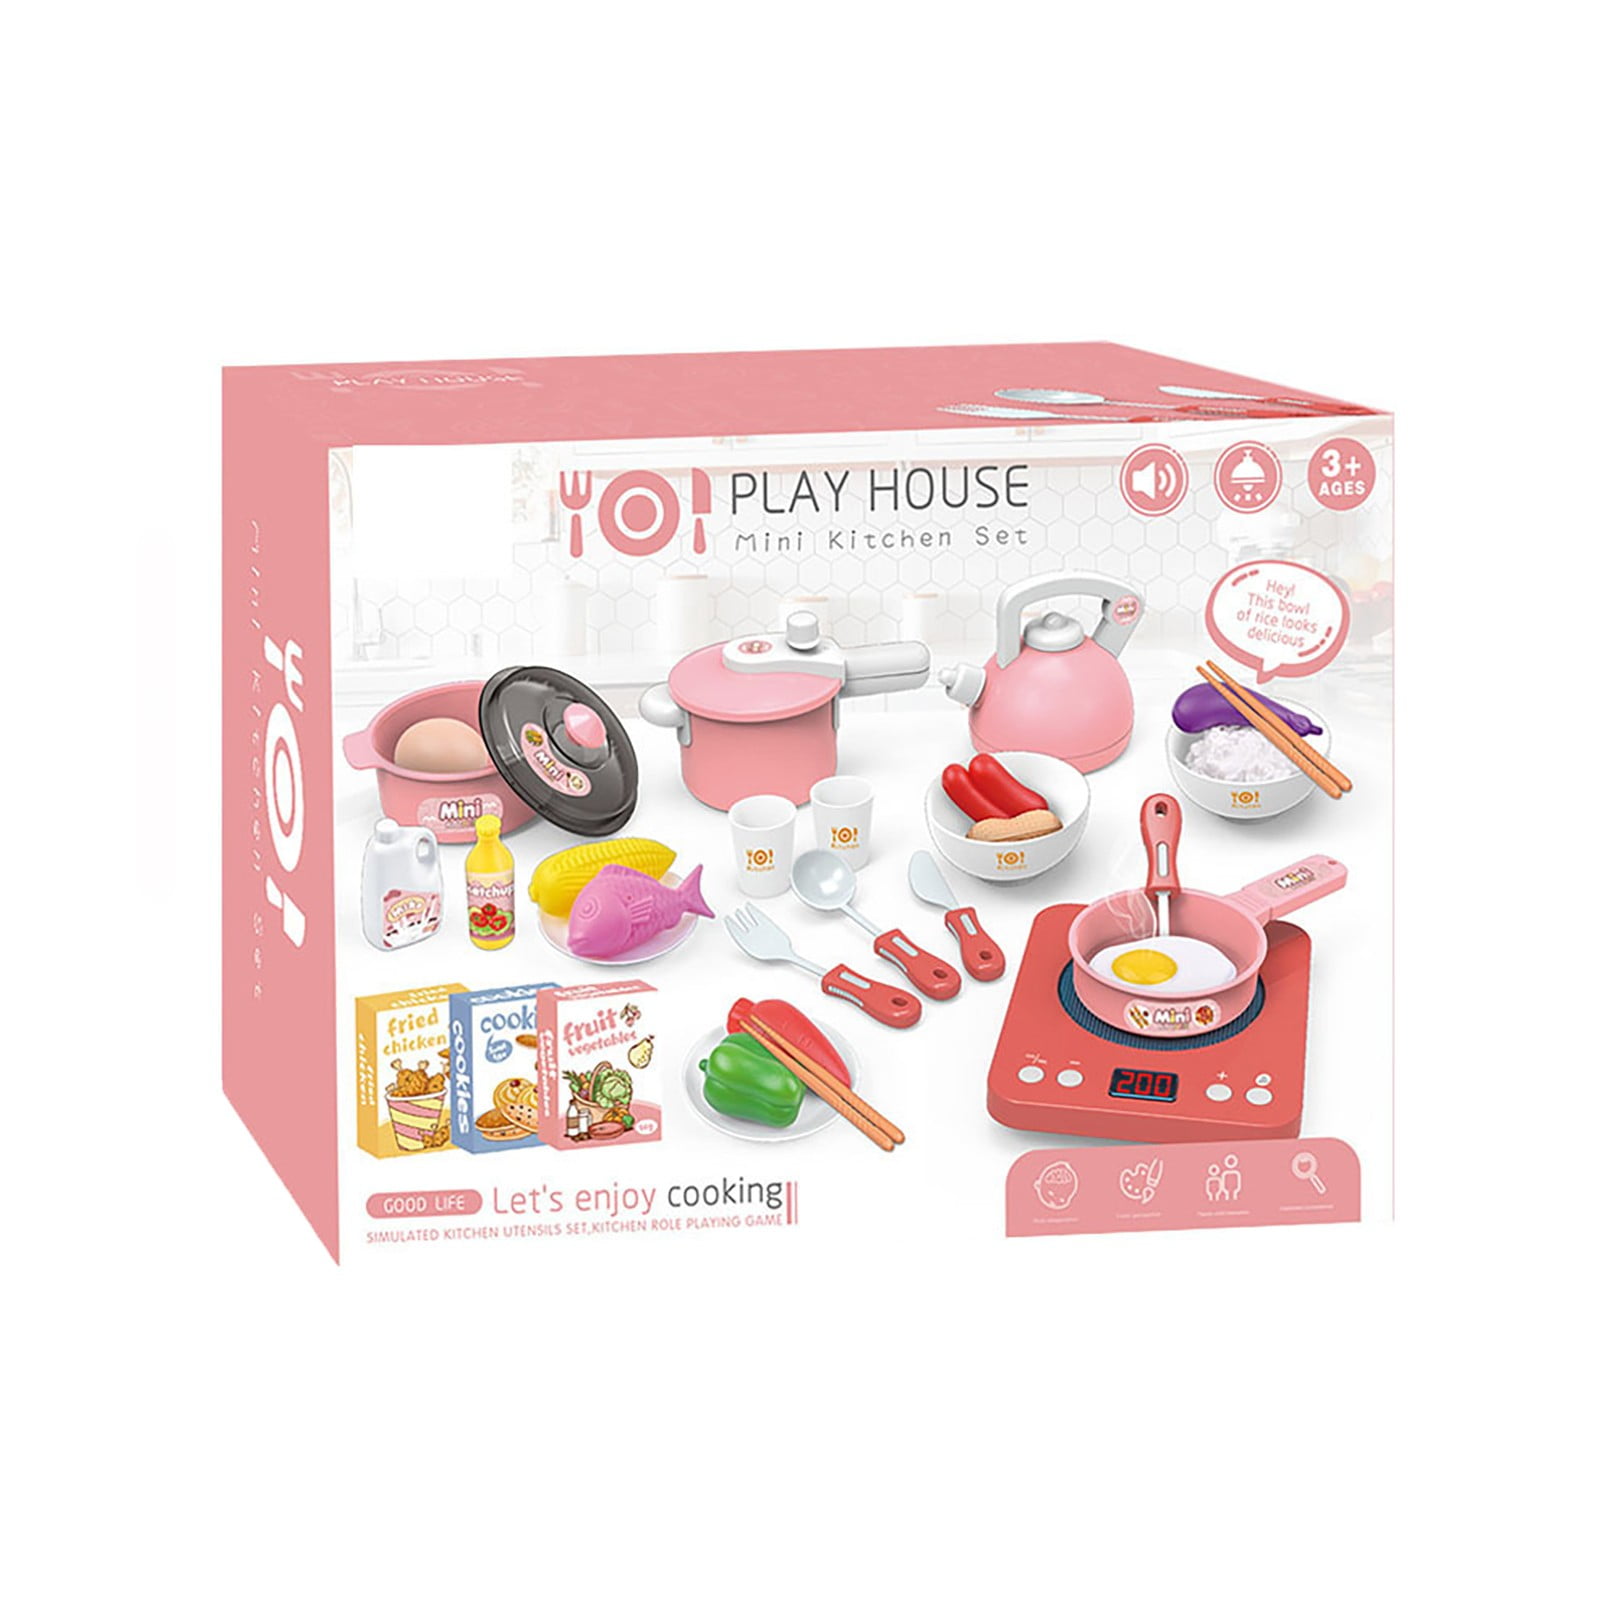 Kids Play Home Kitchen Household Appliances Role Games Toys Accessories Pink 